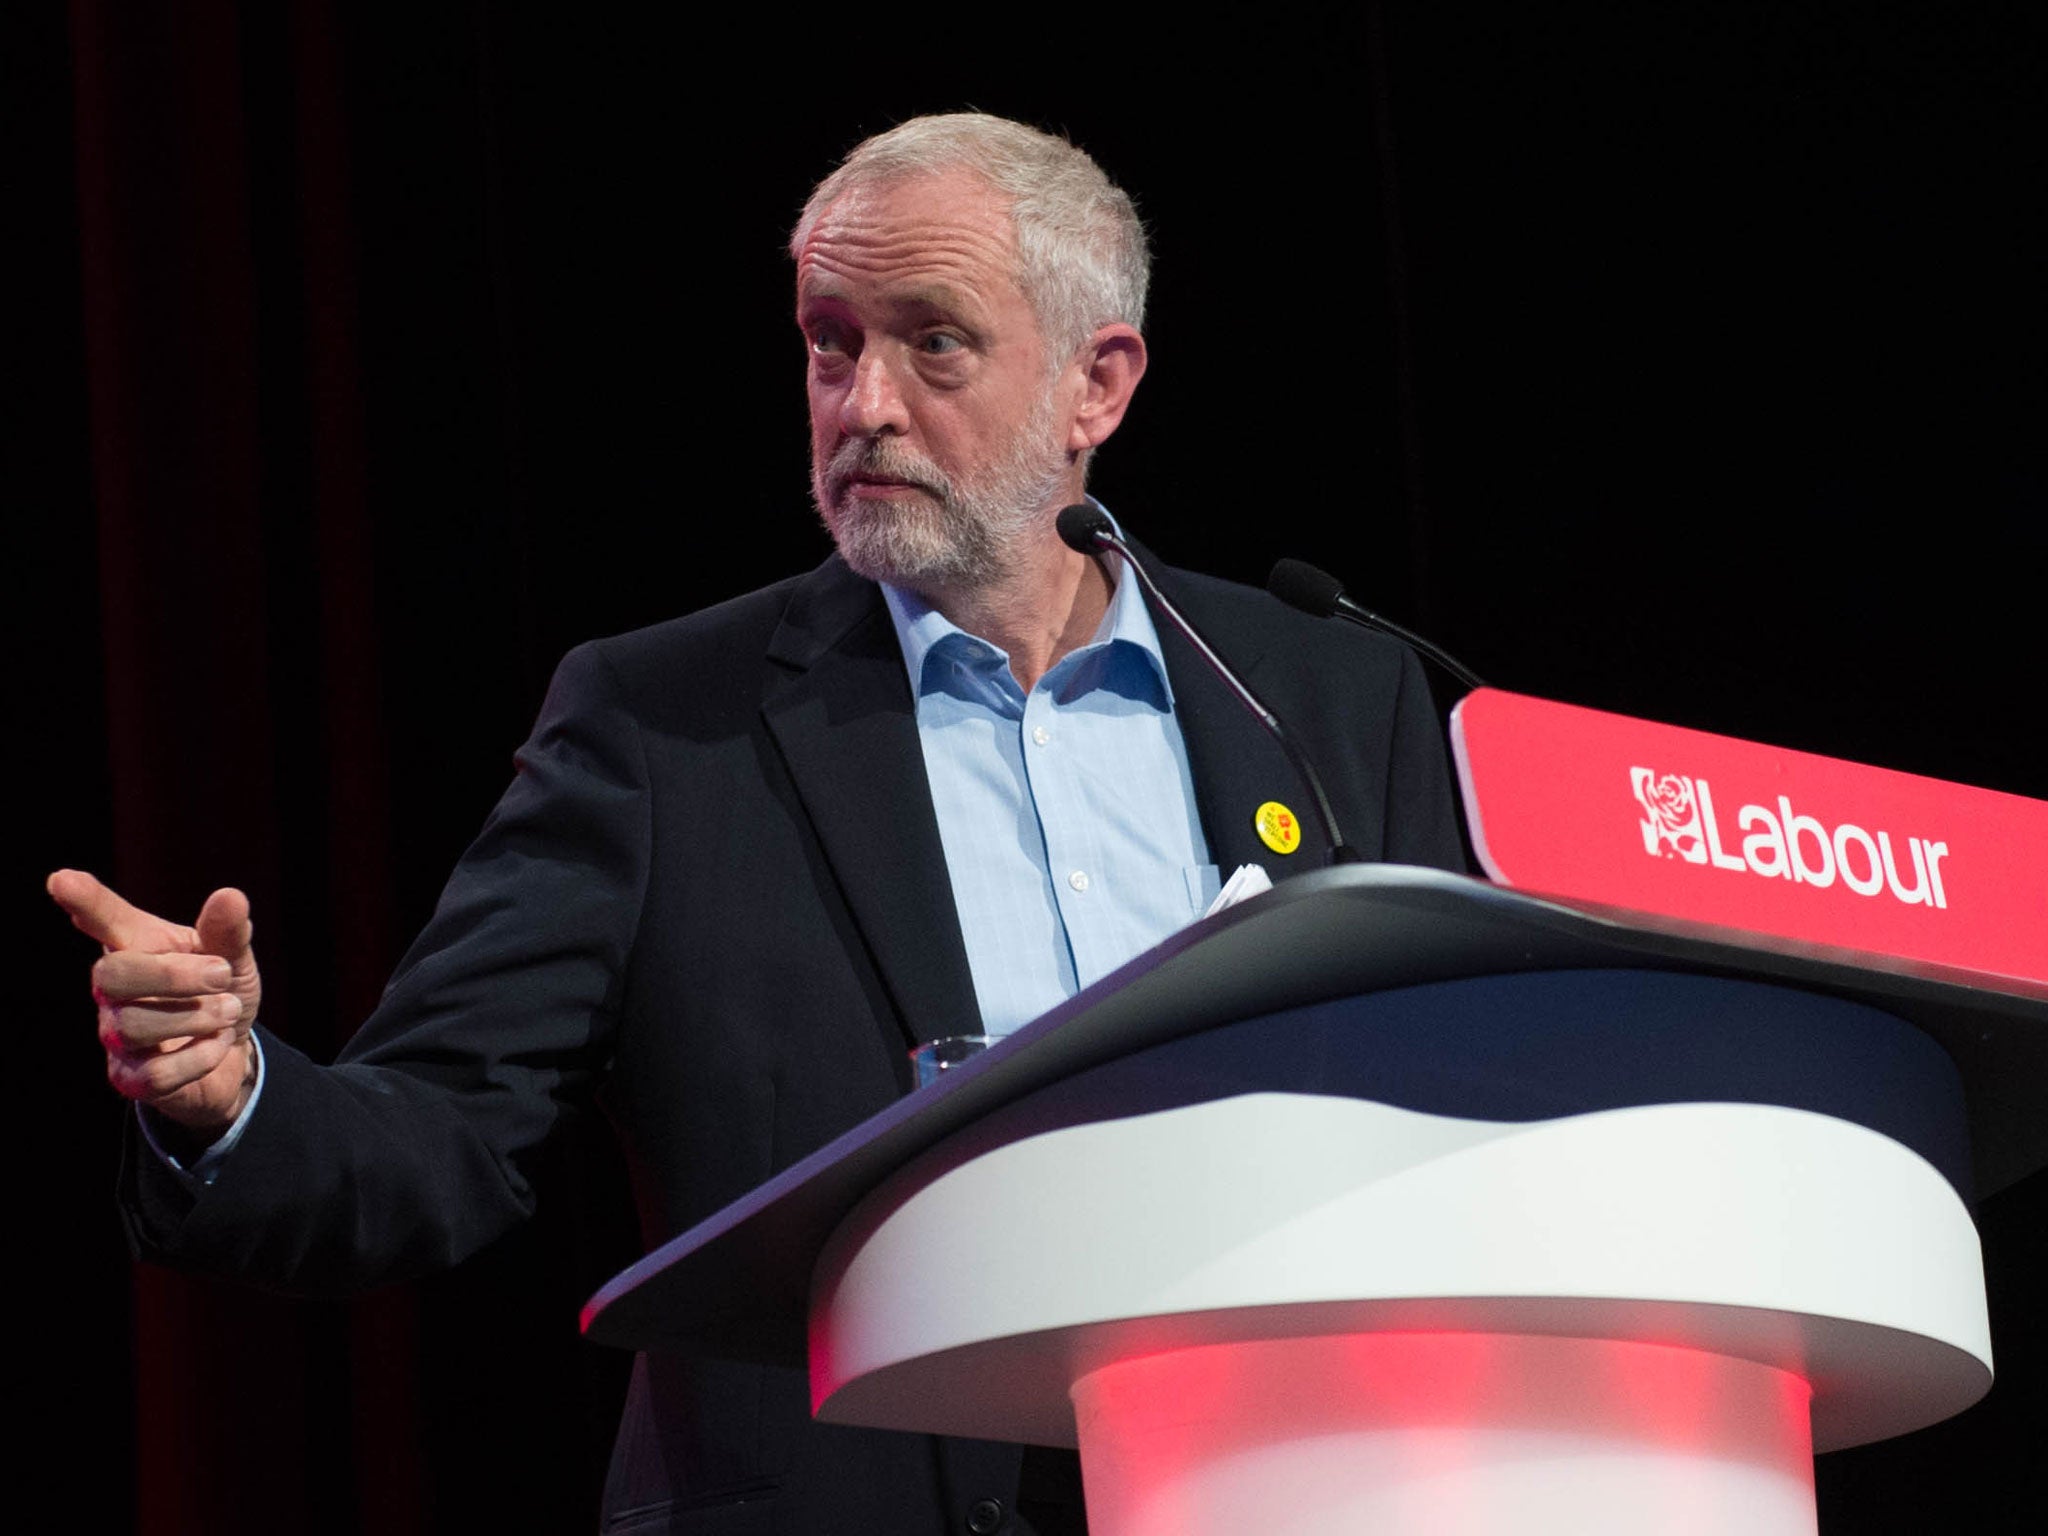 The leader speaks during Labour’s women’s conference in Liverpool today